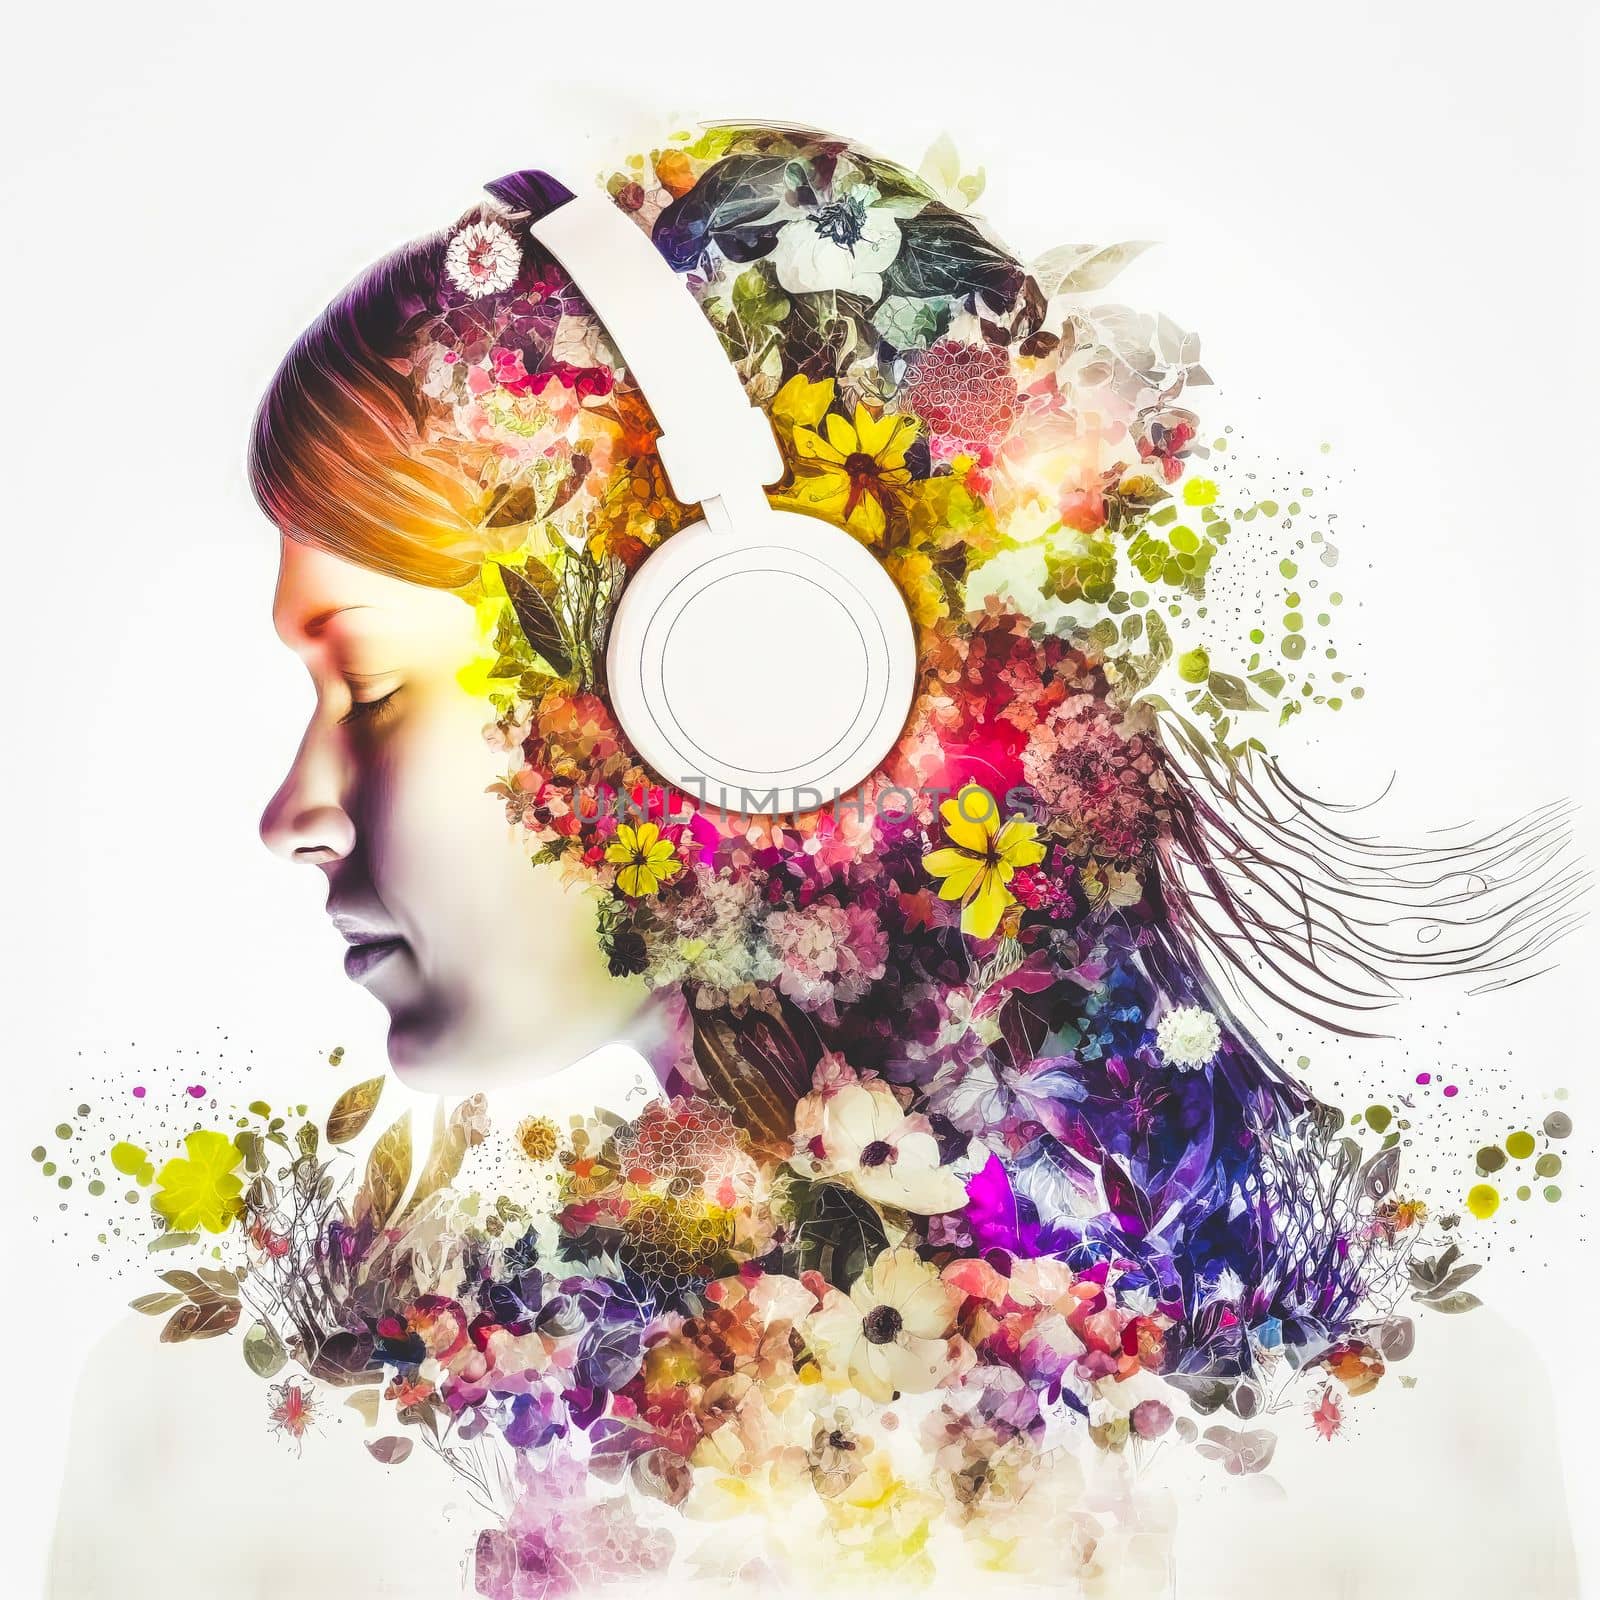 Sedate double exposure woman portrait in headphone with blossom flowers. by biancoblue